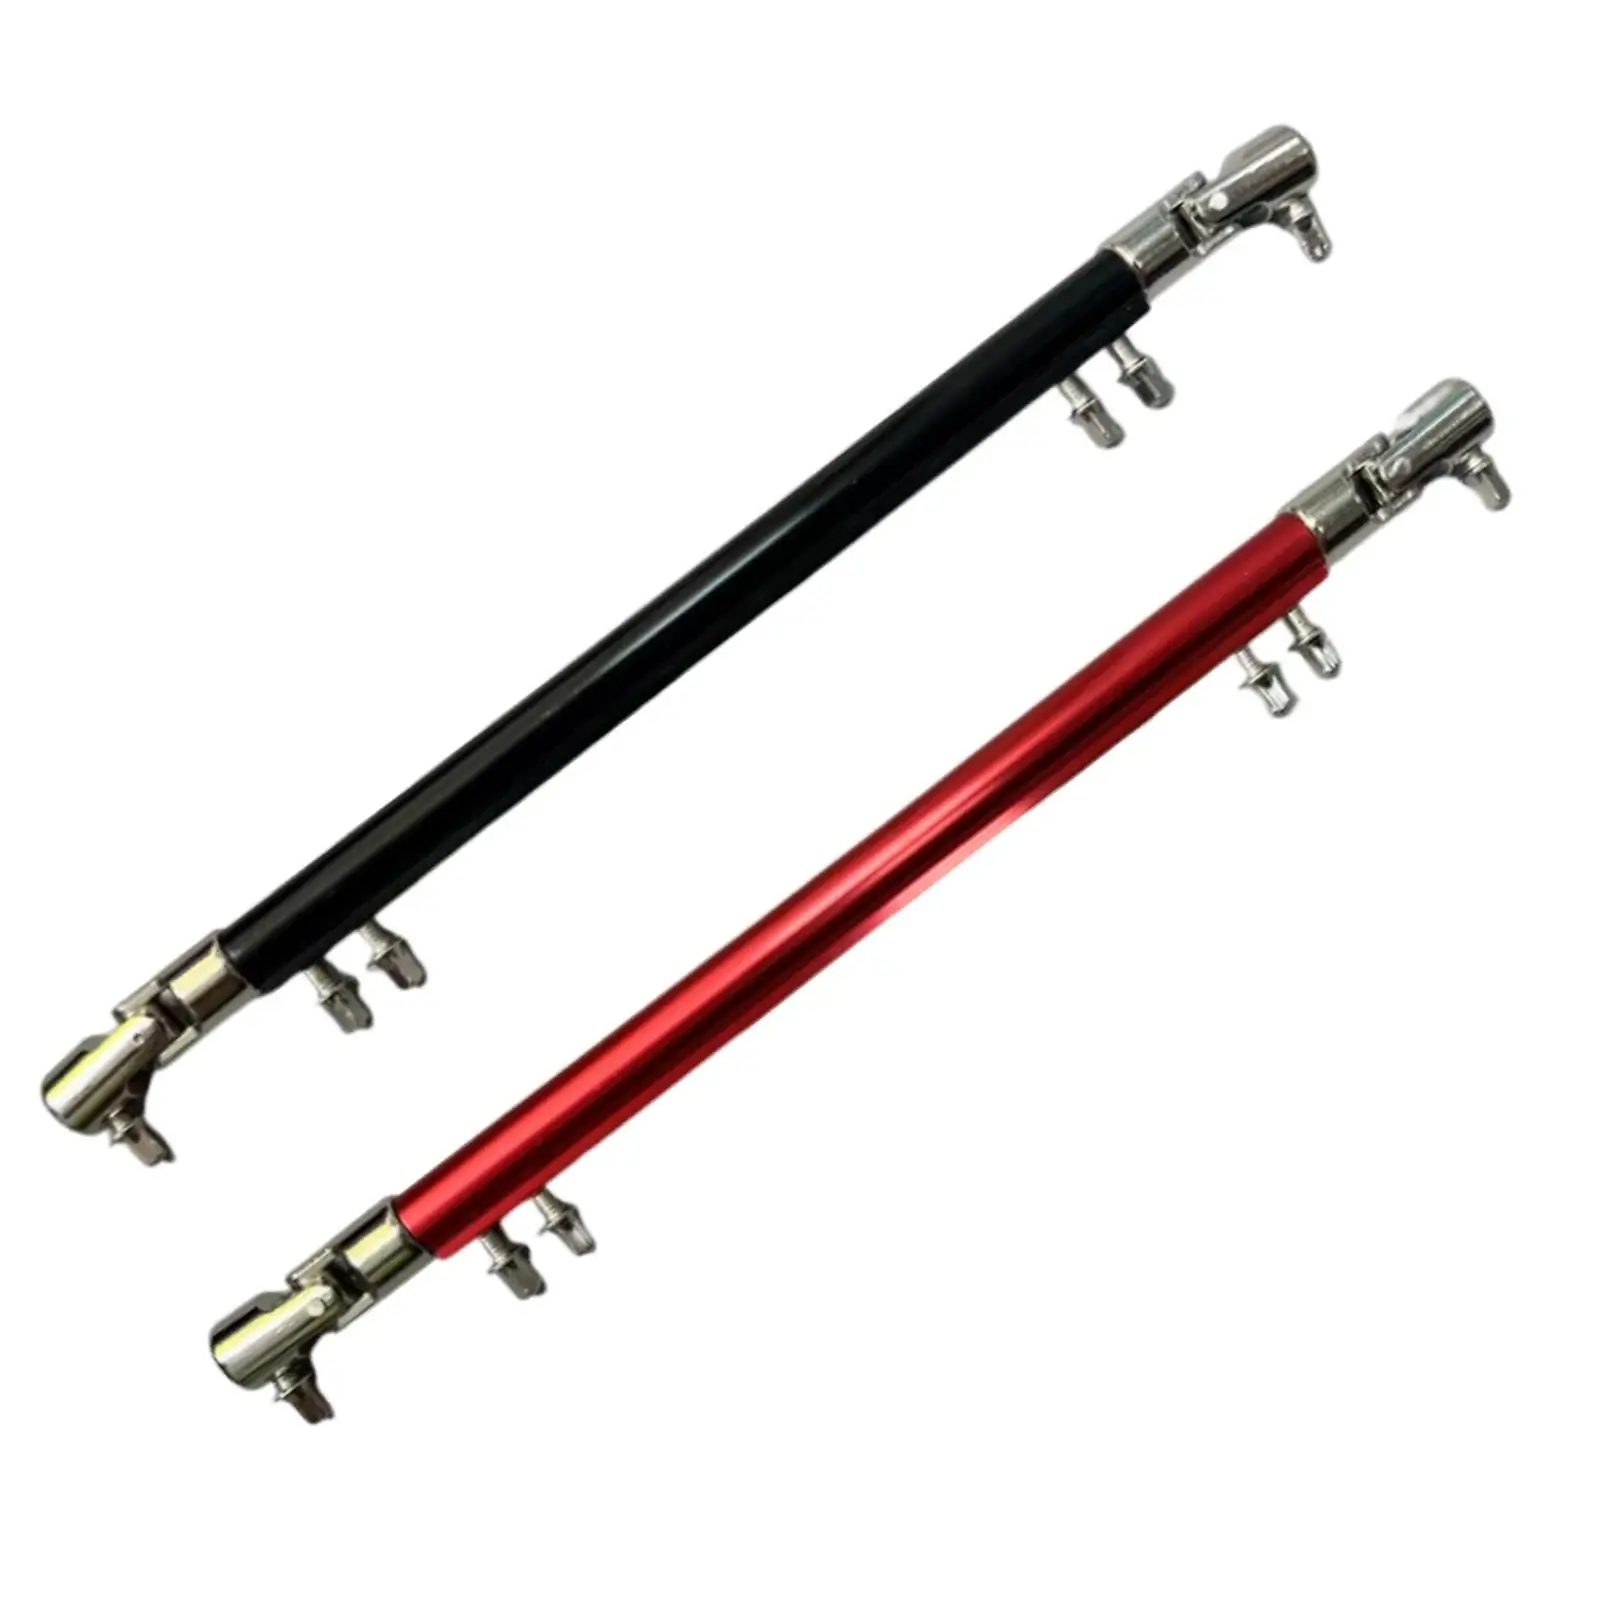 Bass Drum Pedal Driveshaft Rod DIY Replacement Metal Professional Double Drum Pedal Link Bar for Drum Kits Exercise Accessories